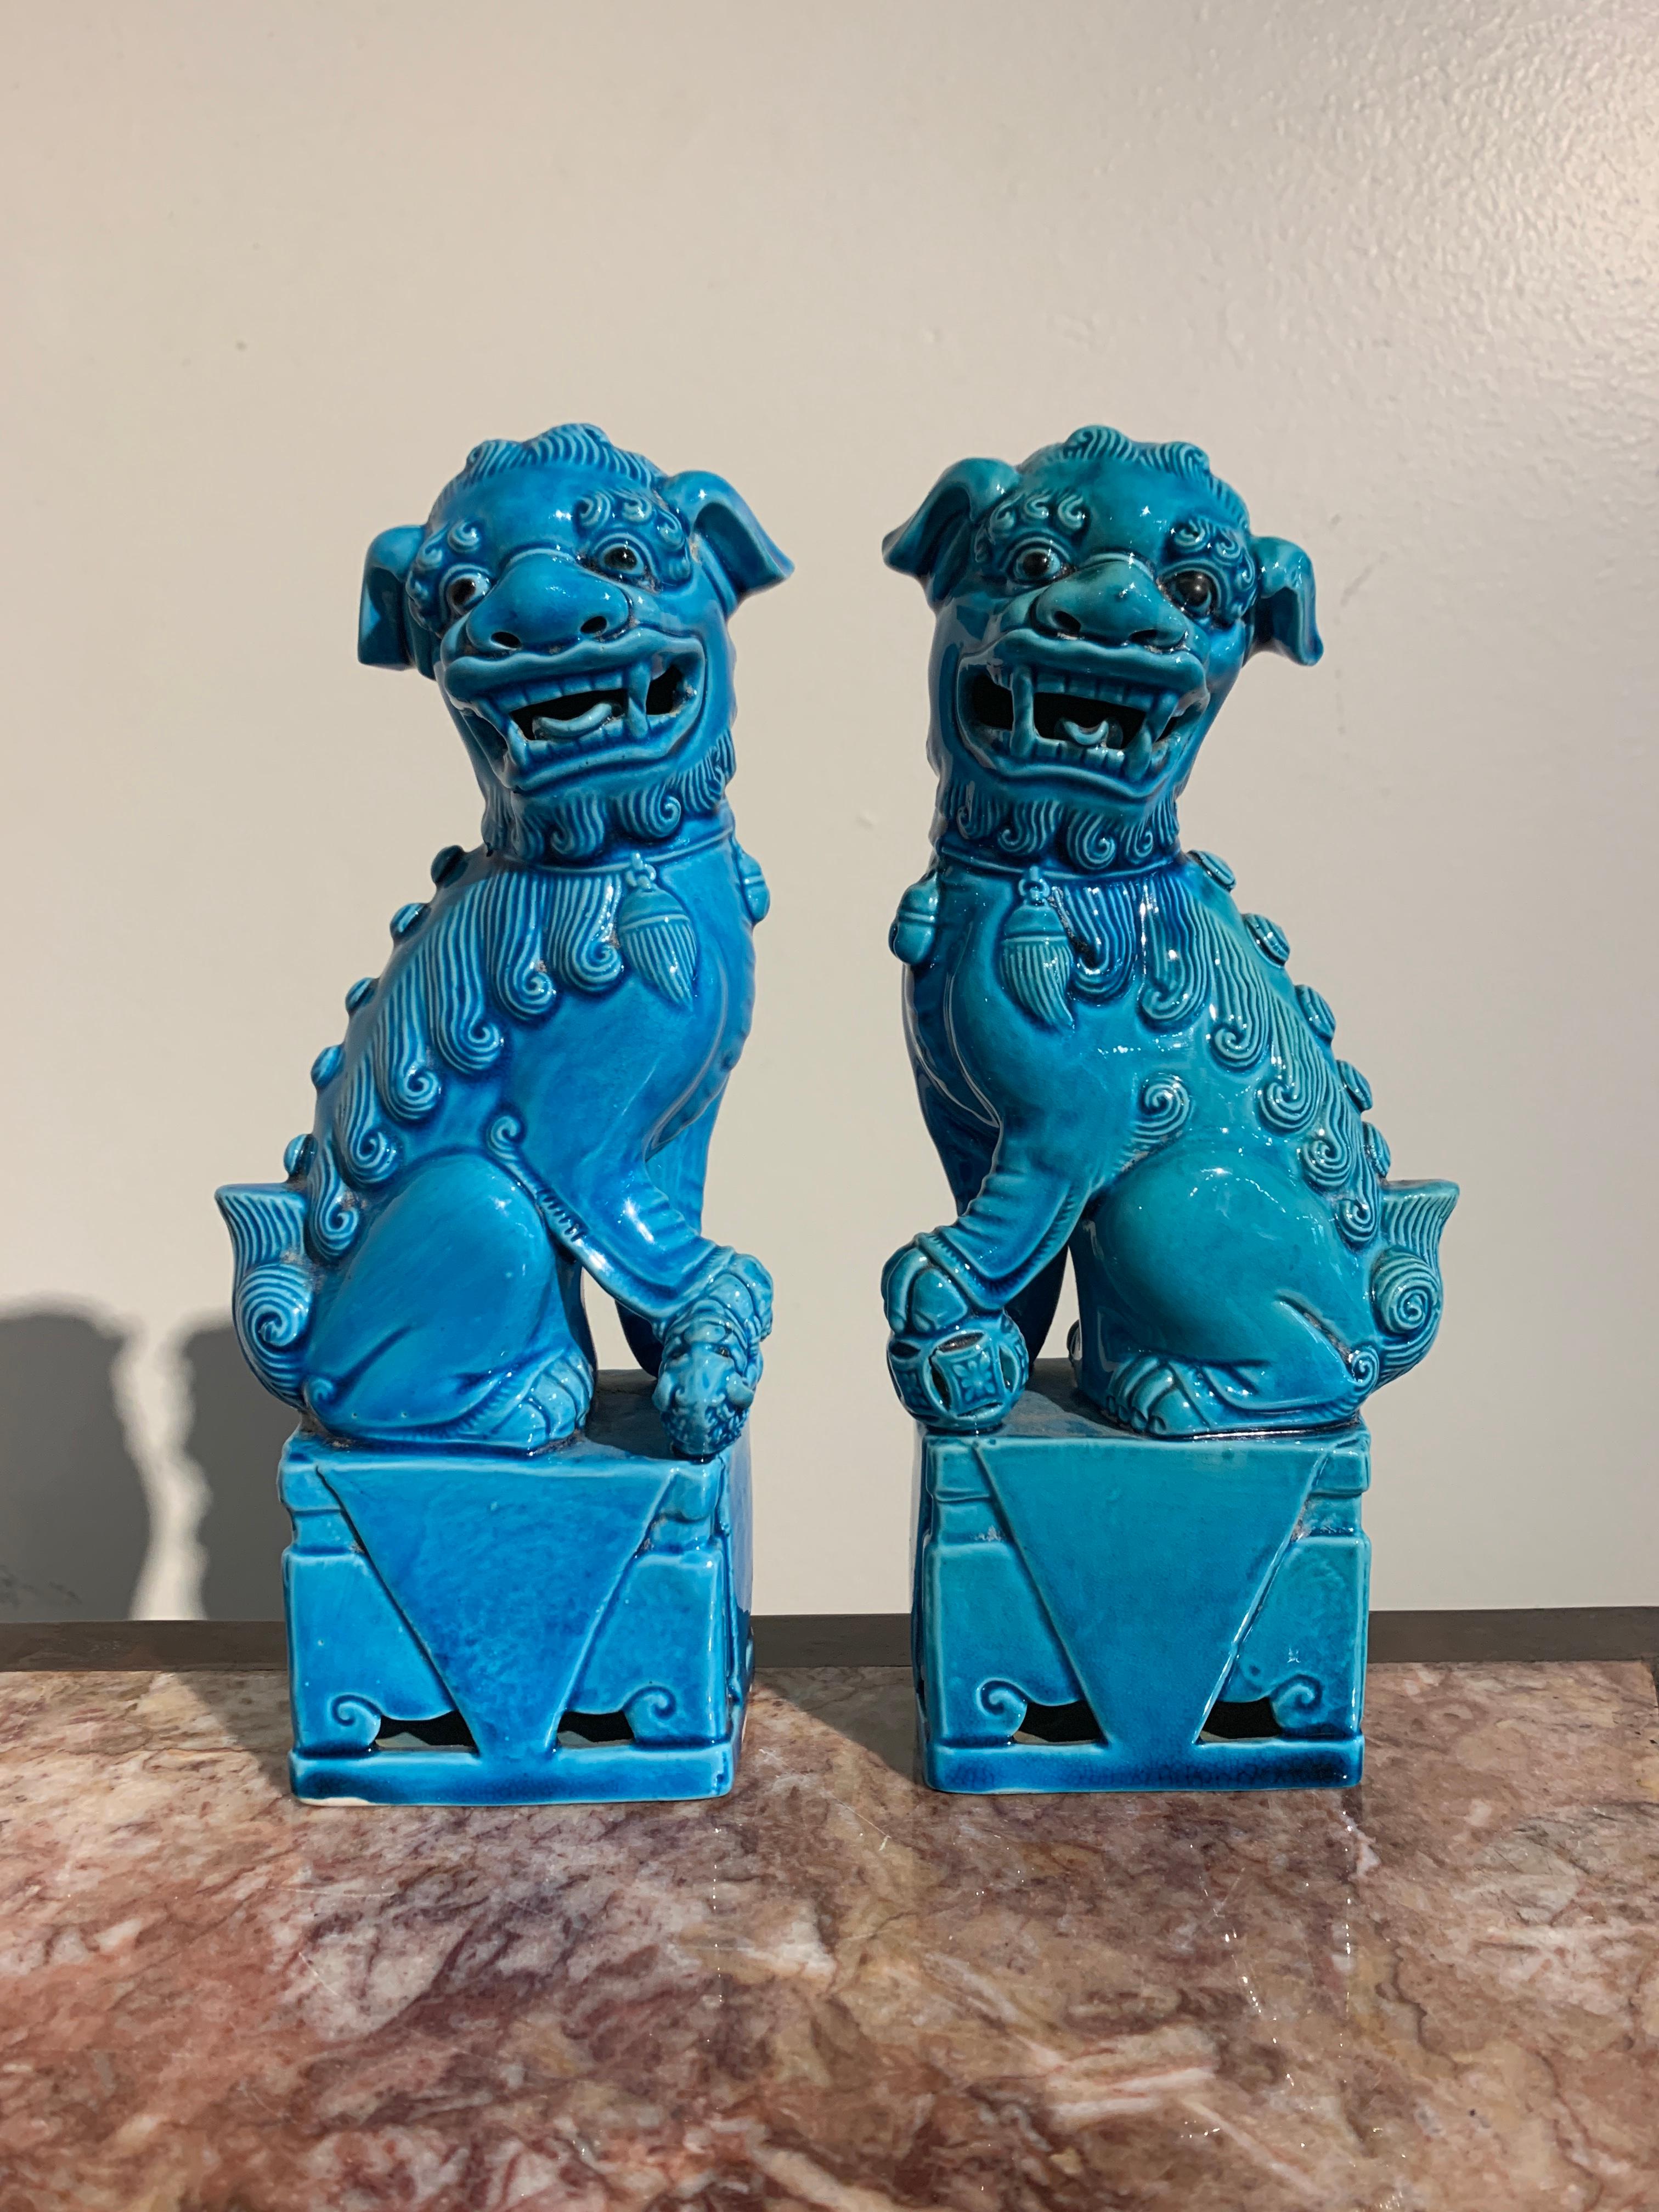 A wonderful small pair of vintage turquoise glazed porcelain foo dogs (also referred to as foo lions), 1970s, Hong Kong.

The charming small pair of foo dogs sit upright on their haunches upon raised pedestals. The male with a ball underfoot, the